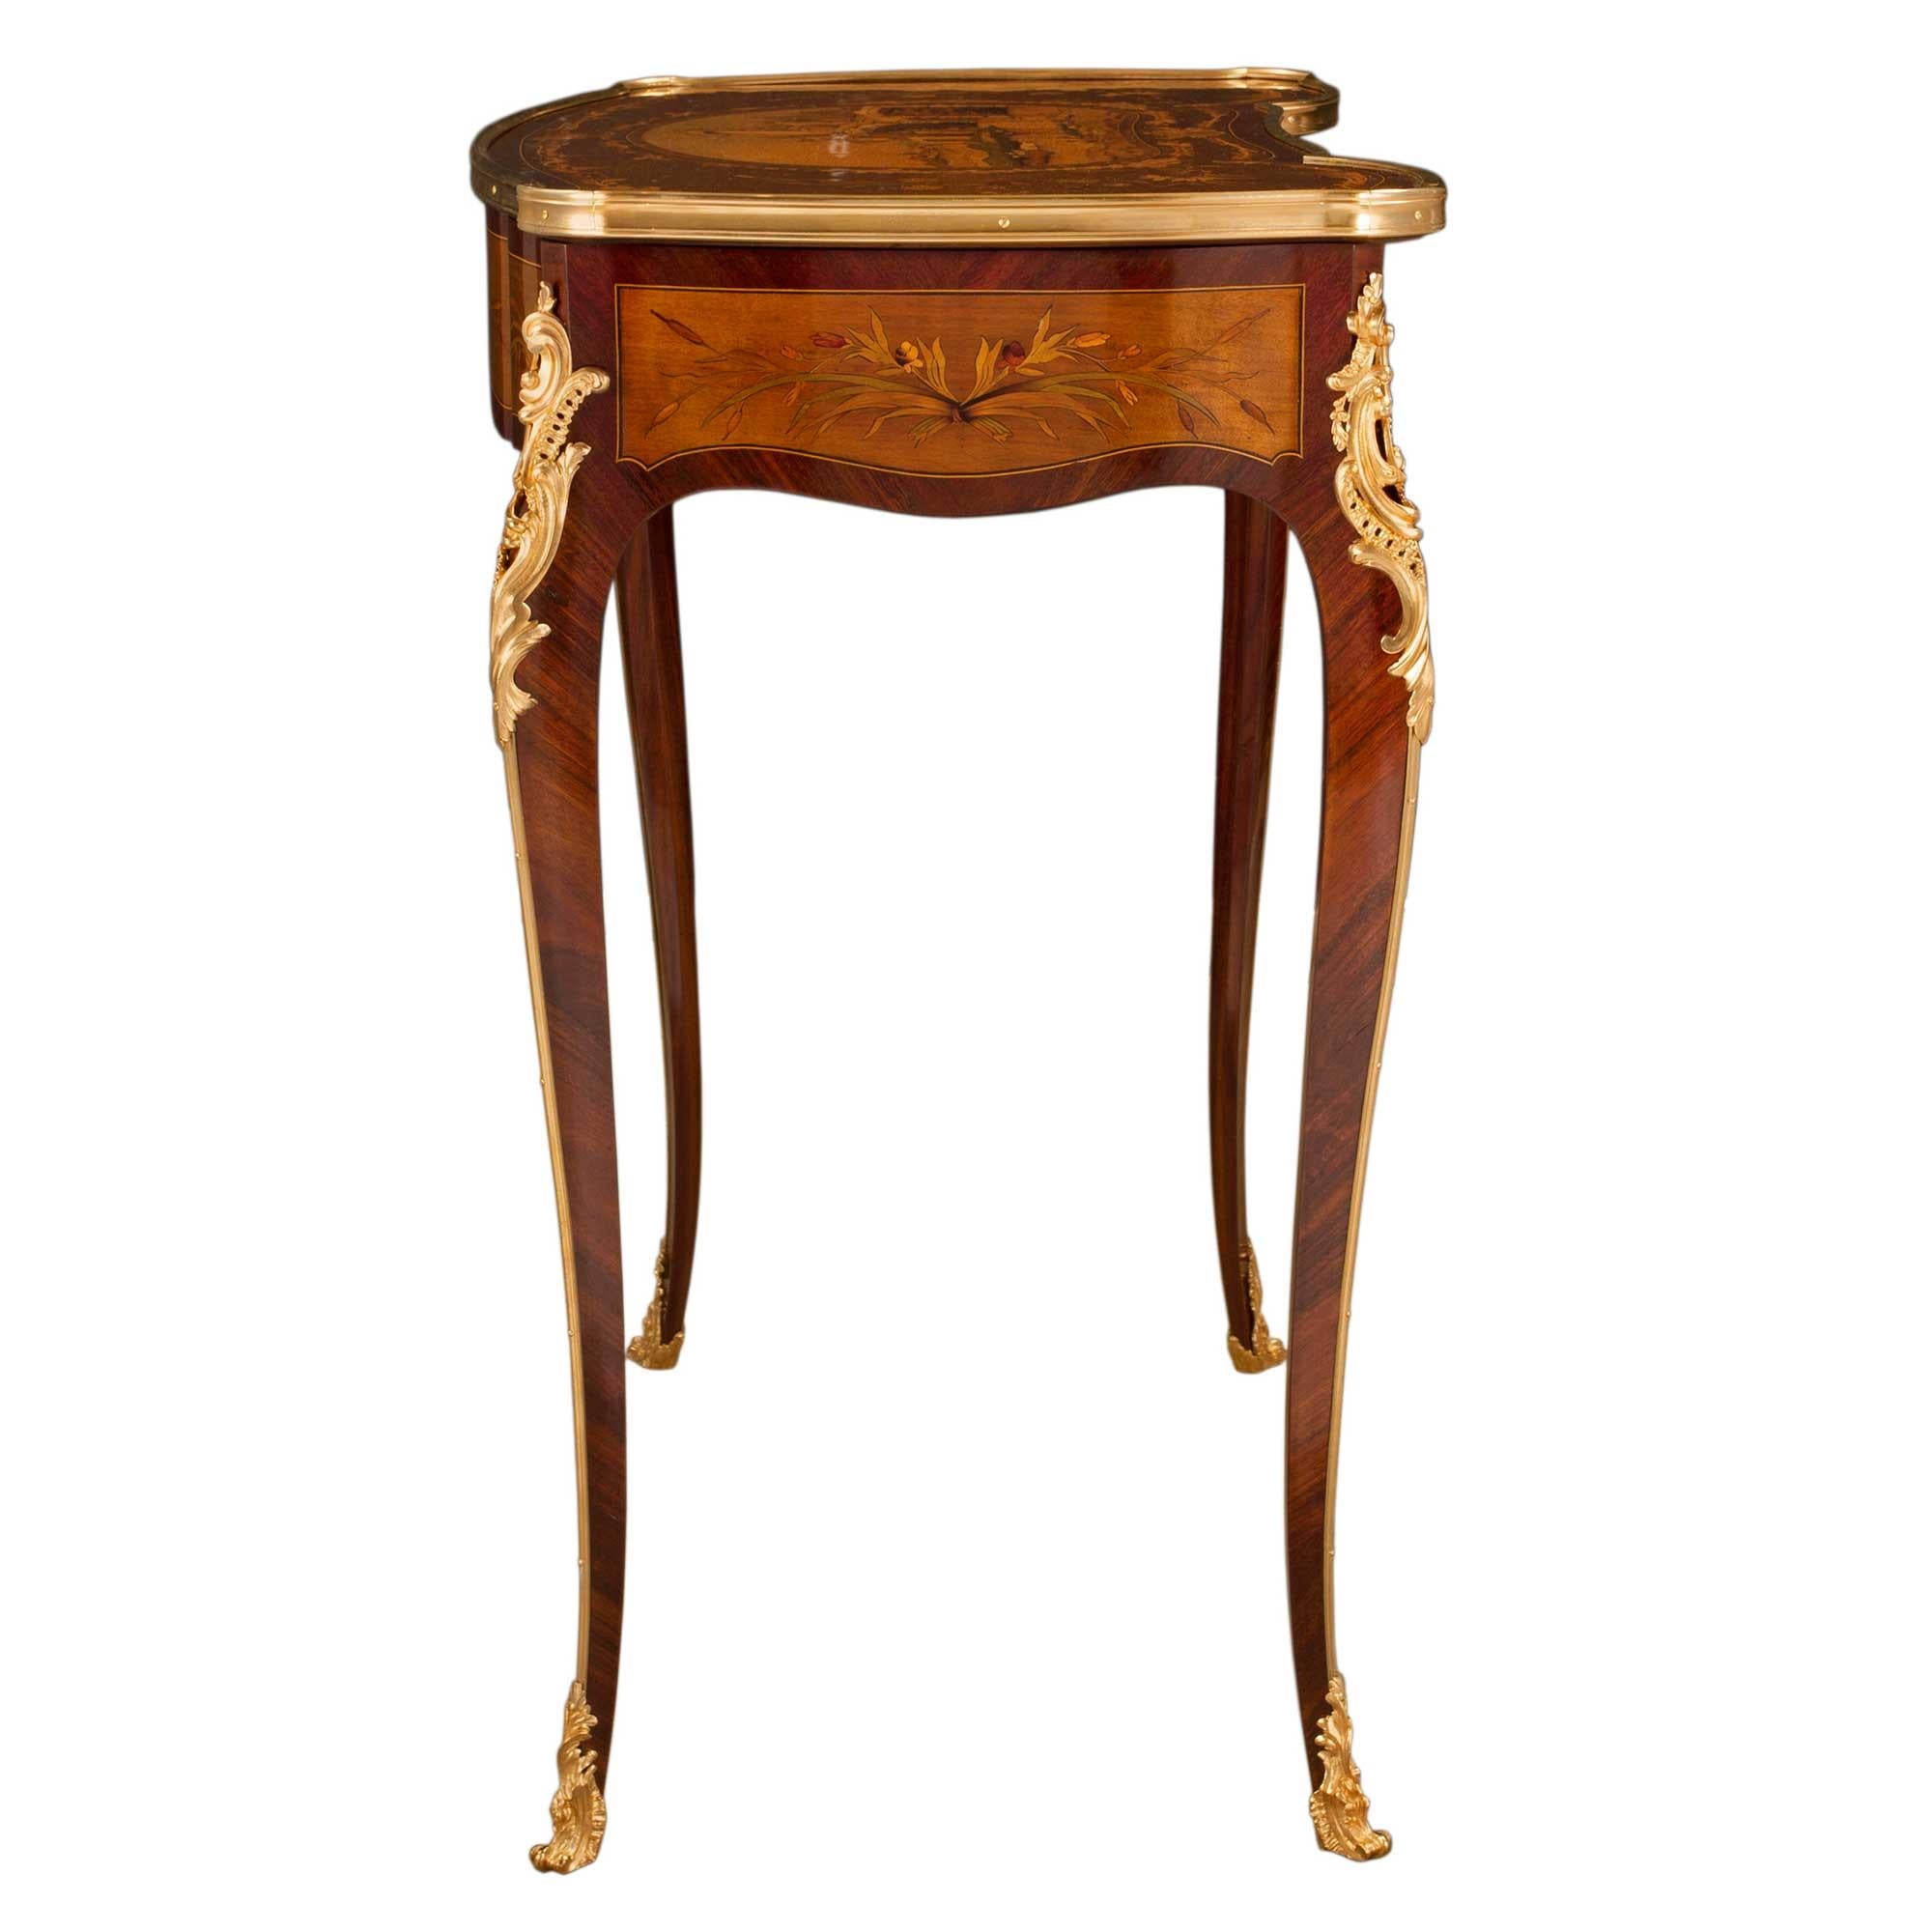 French 19th Century Louis XV Style Kingwood, Tulipwood and Ormolu Dressing Table For Sale 2